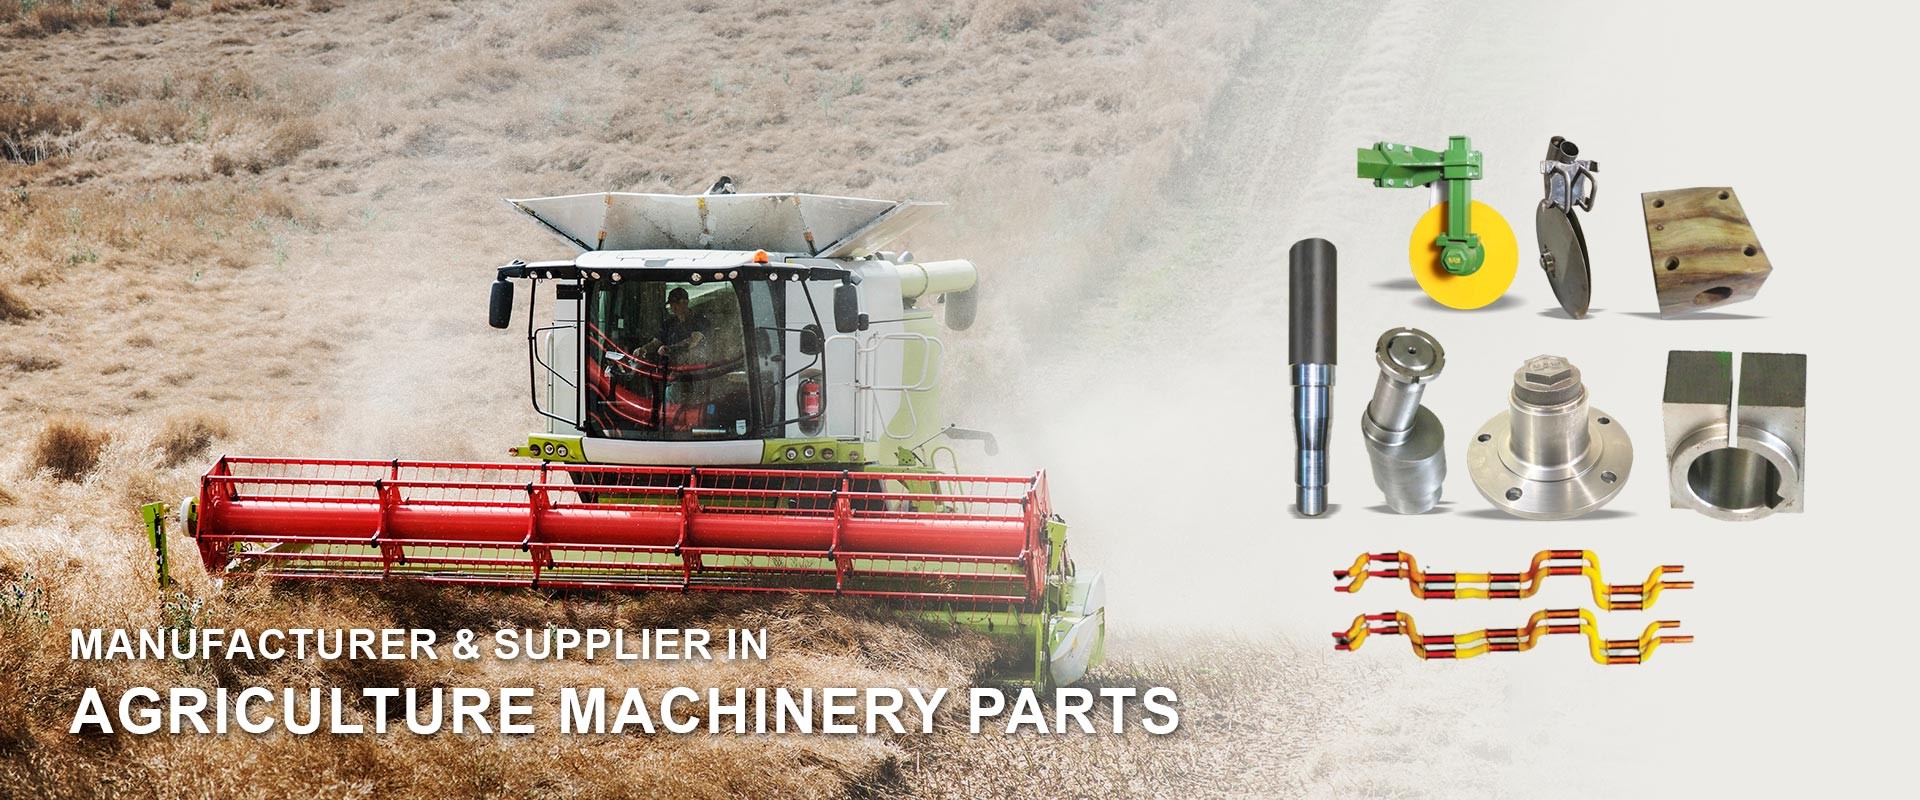 Manufacturer & Supplier of Agriculture Machinery Parts